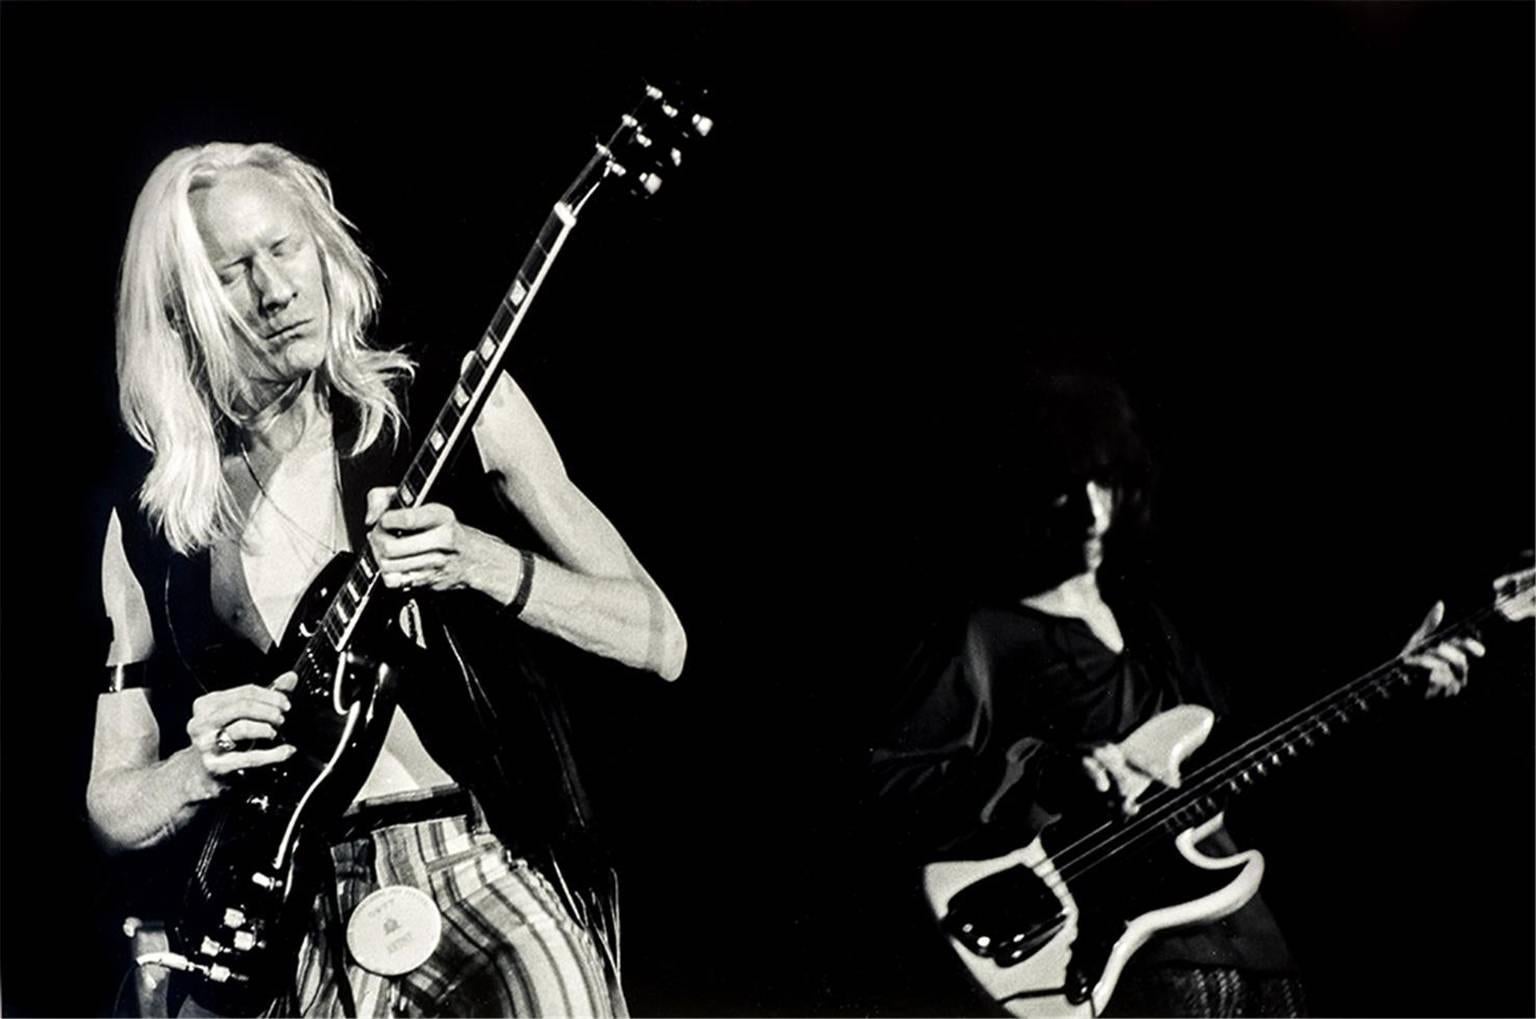 Jay Dickman Black and White Photograph - Johnny Winter at Texas Pop Music Festival